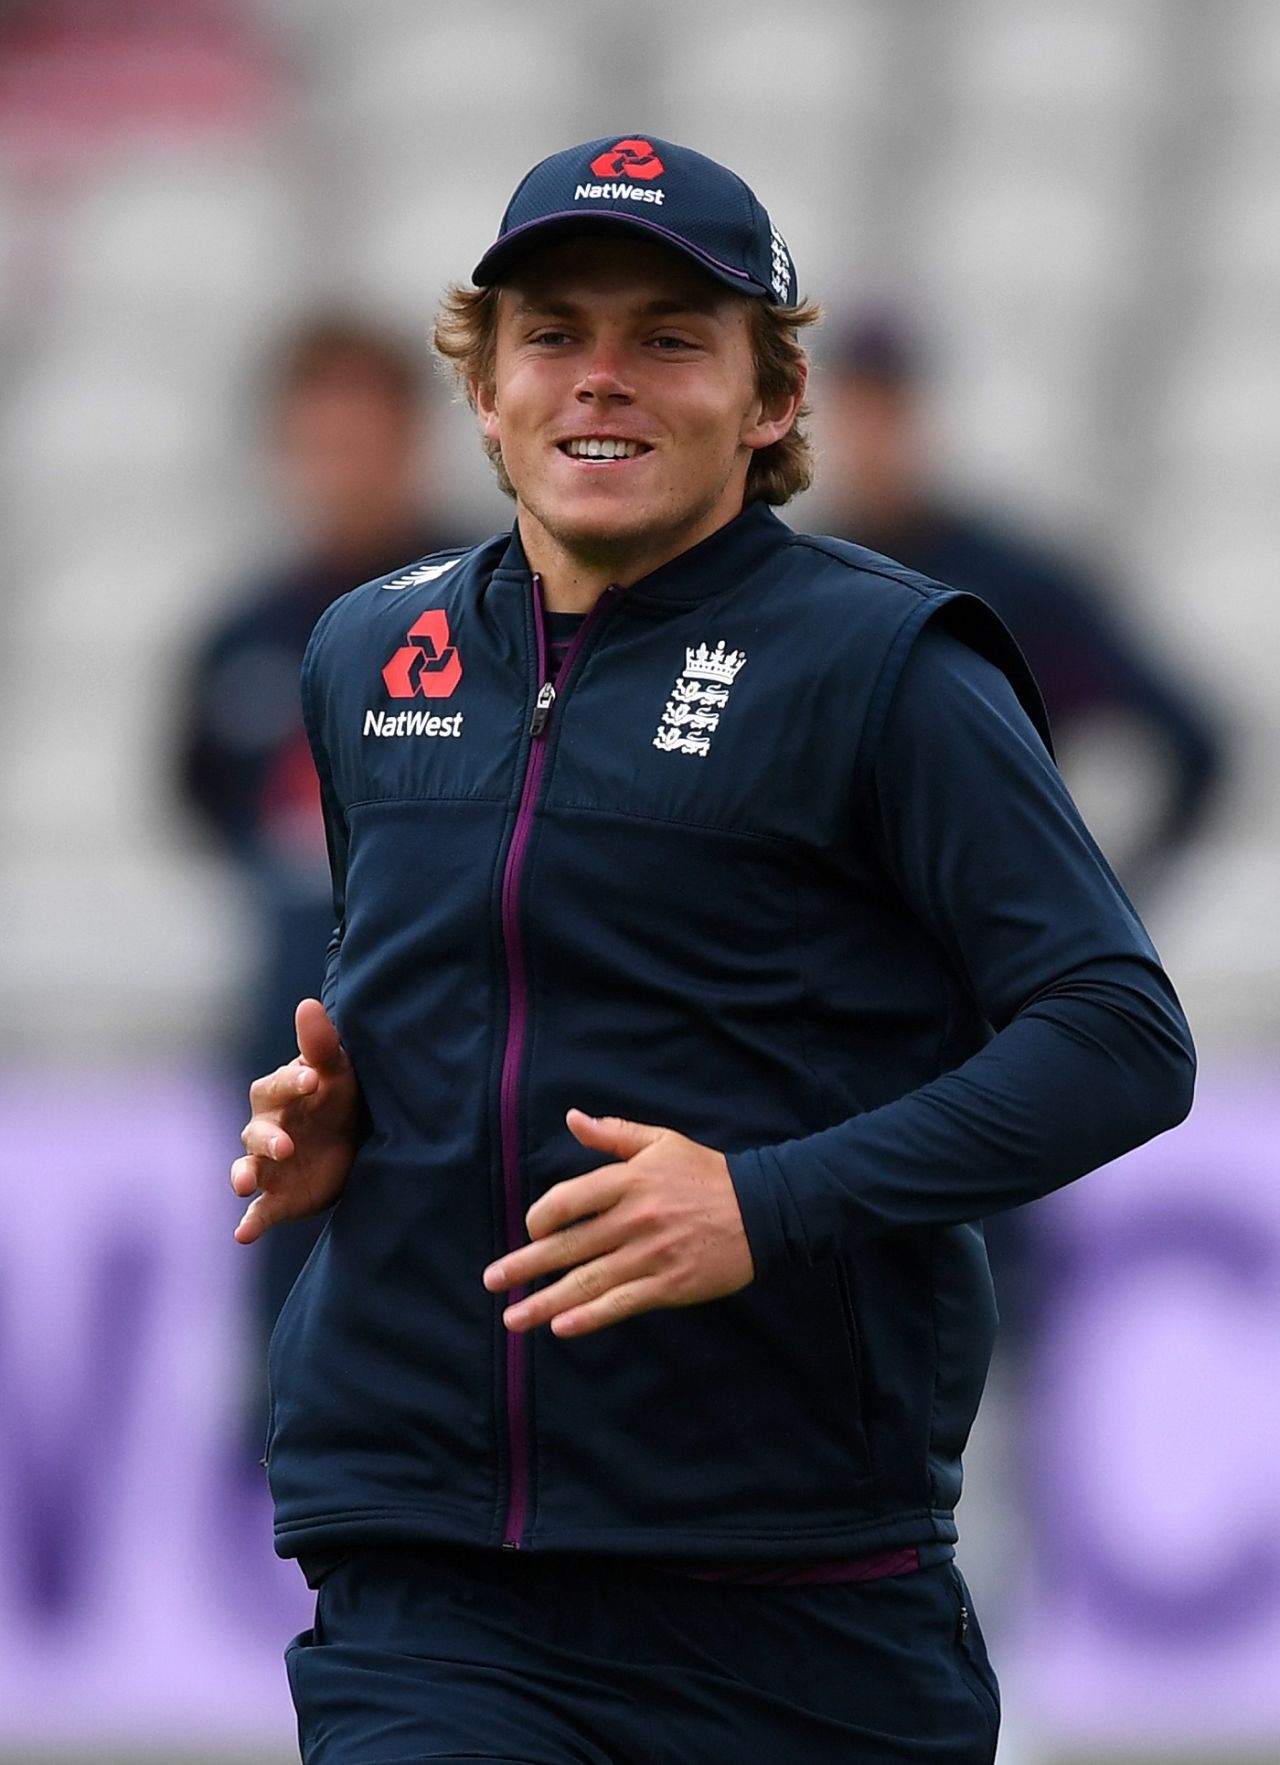 Sam Curran during a training session, Manchester, July 14, 2020